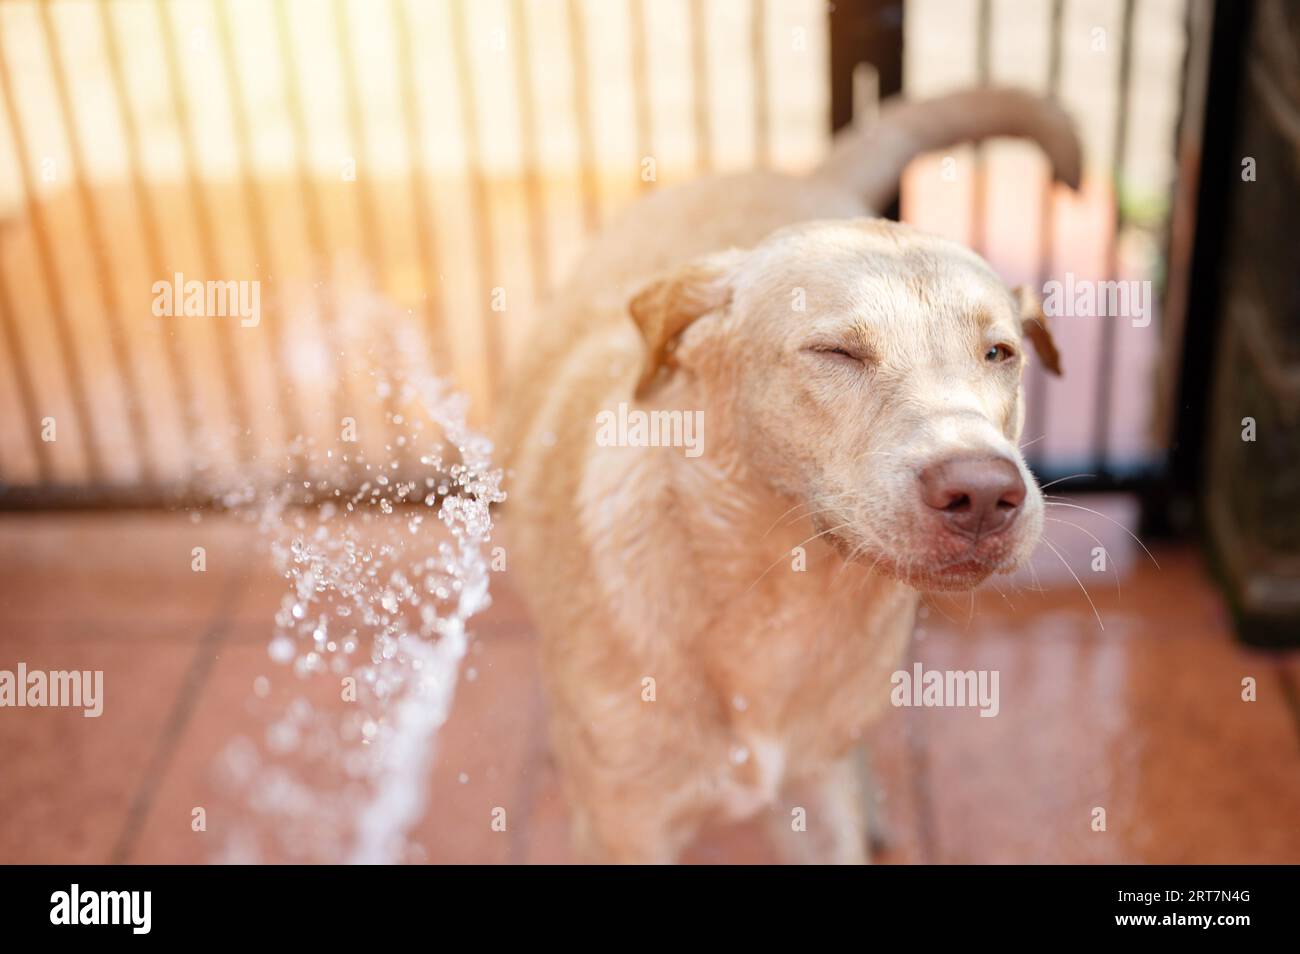 Labrador dog with closed eyes portrait to avoid water from hose Stock Photo